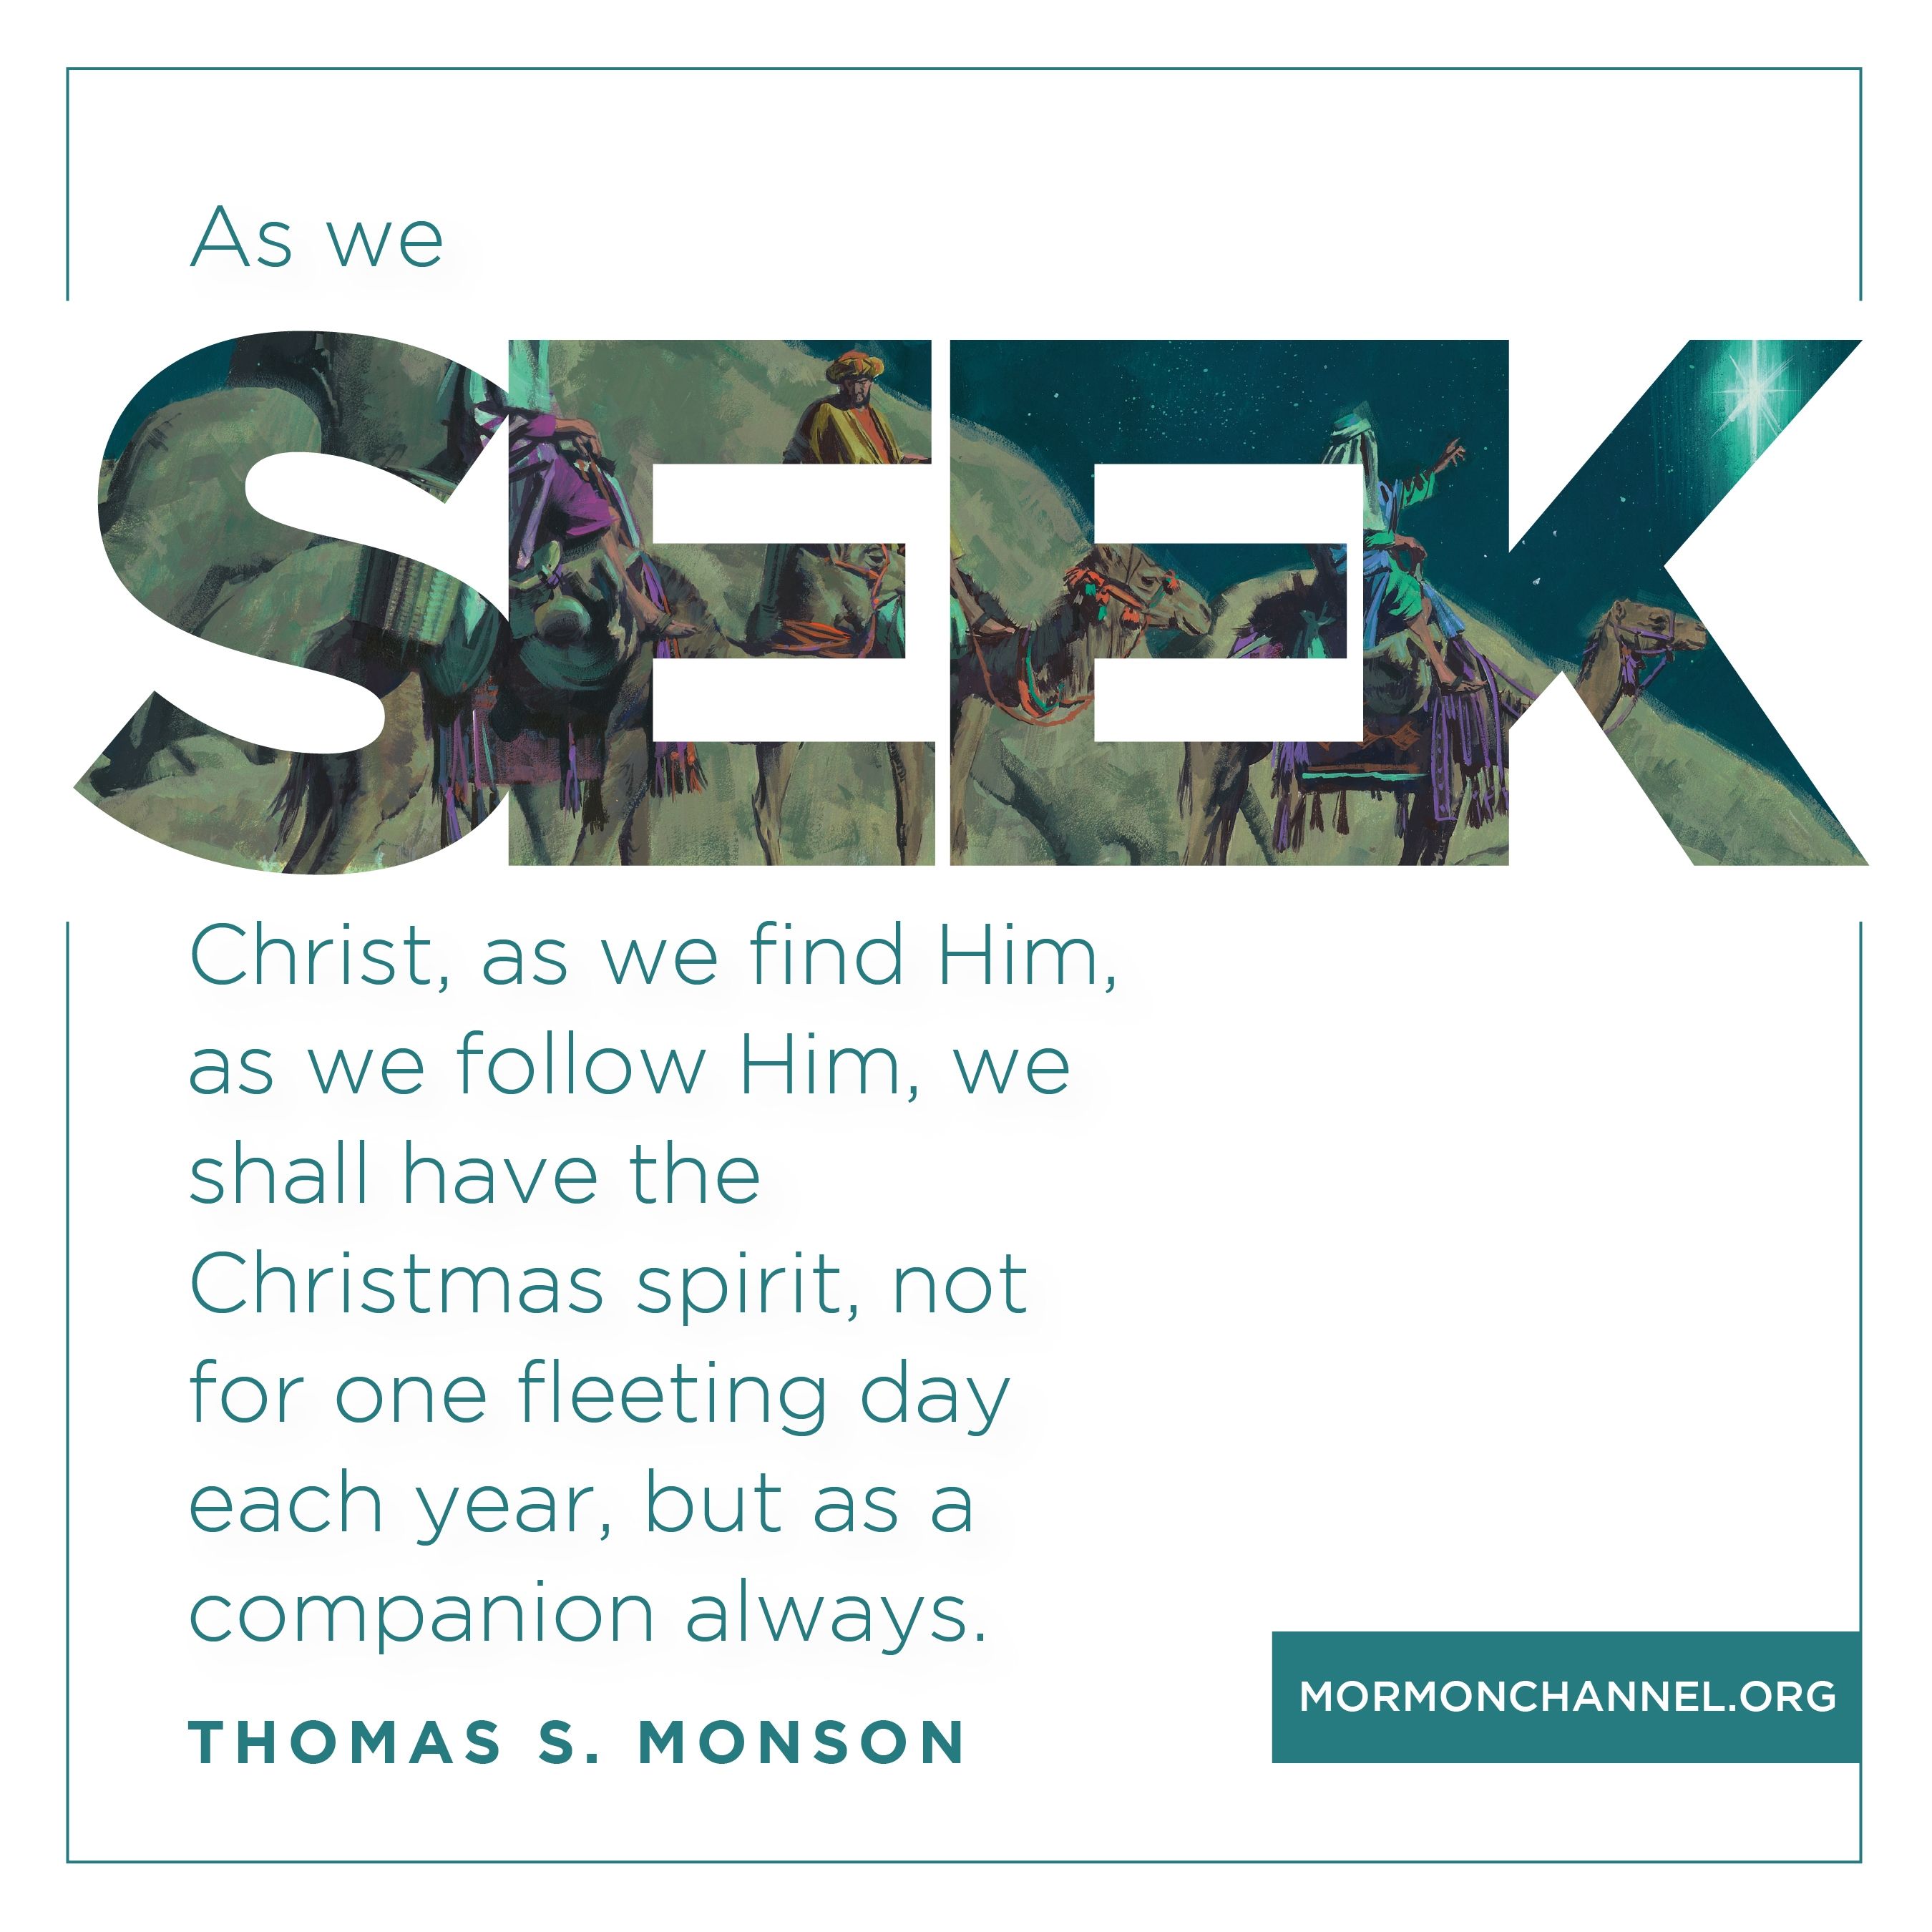 “As we seek Christ, as we find Him, as we follow Him, we shall have the Christmas spirit, not for one fleeting day each year, but as a companion always.”—President Thomas S. Monson, “In the Search of the Christmas Spirit” © undefined ipCode 1.